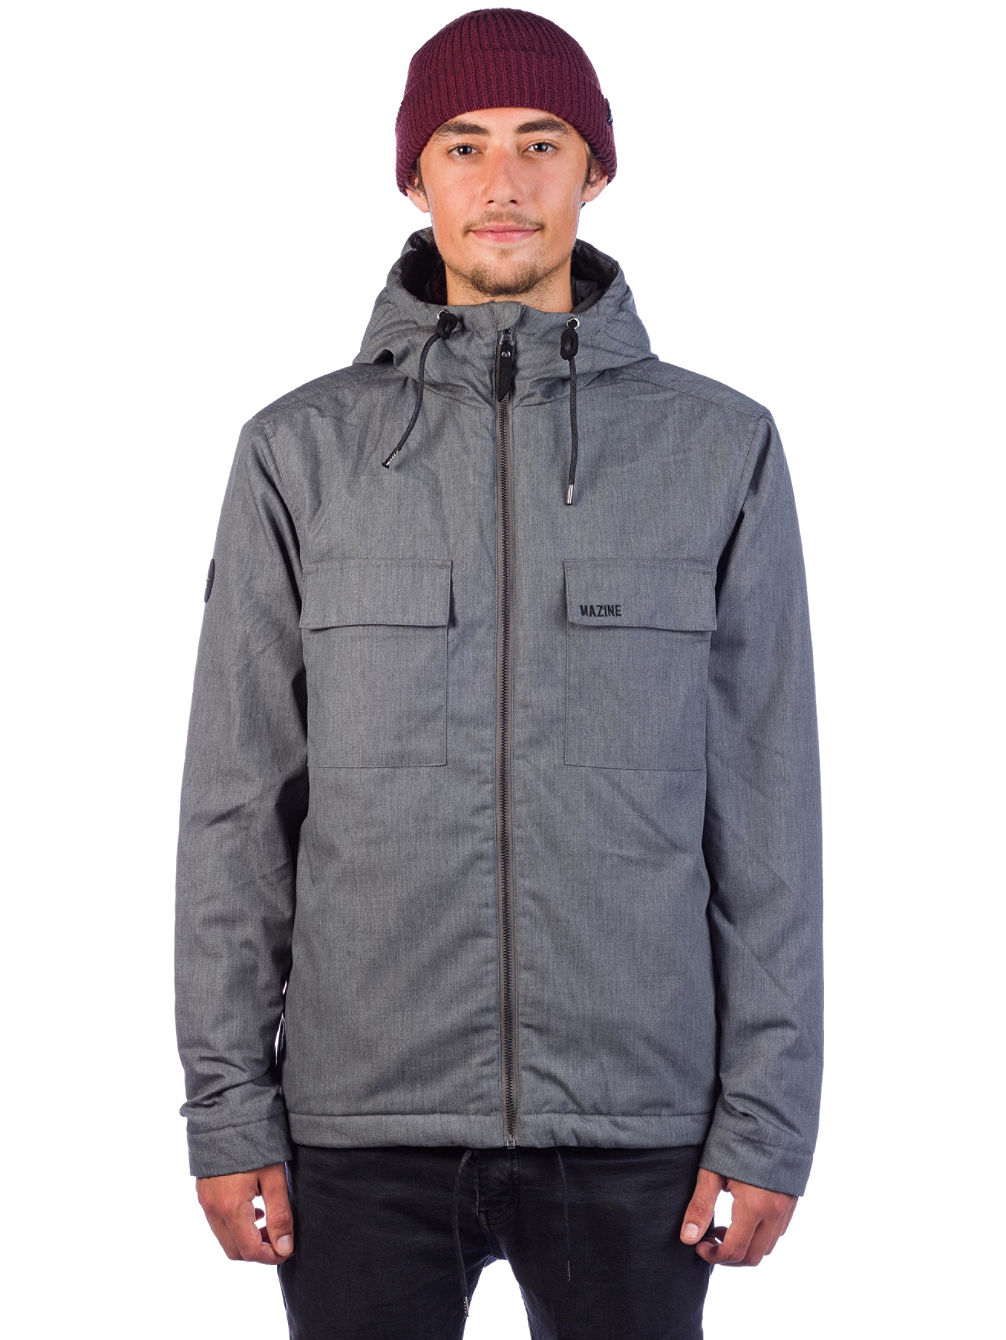 Stainfield Jacke